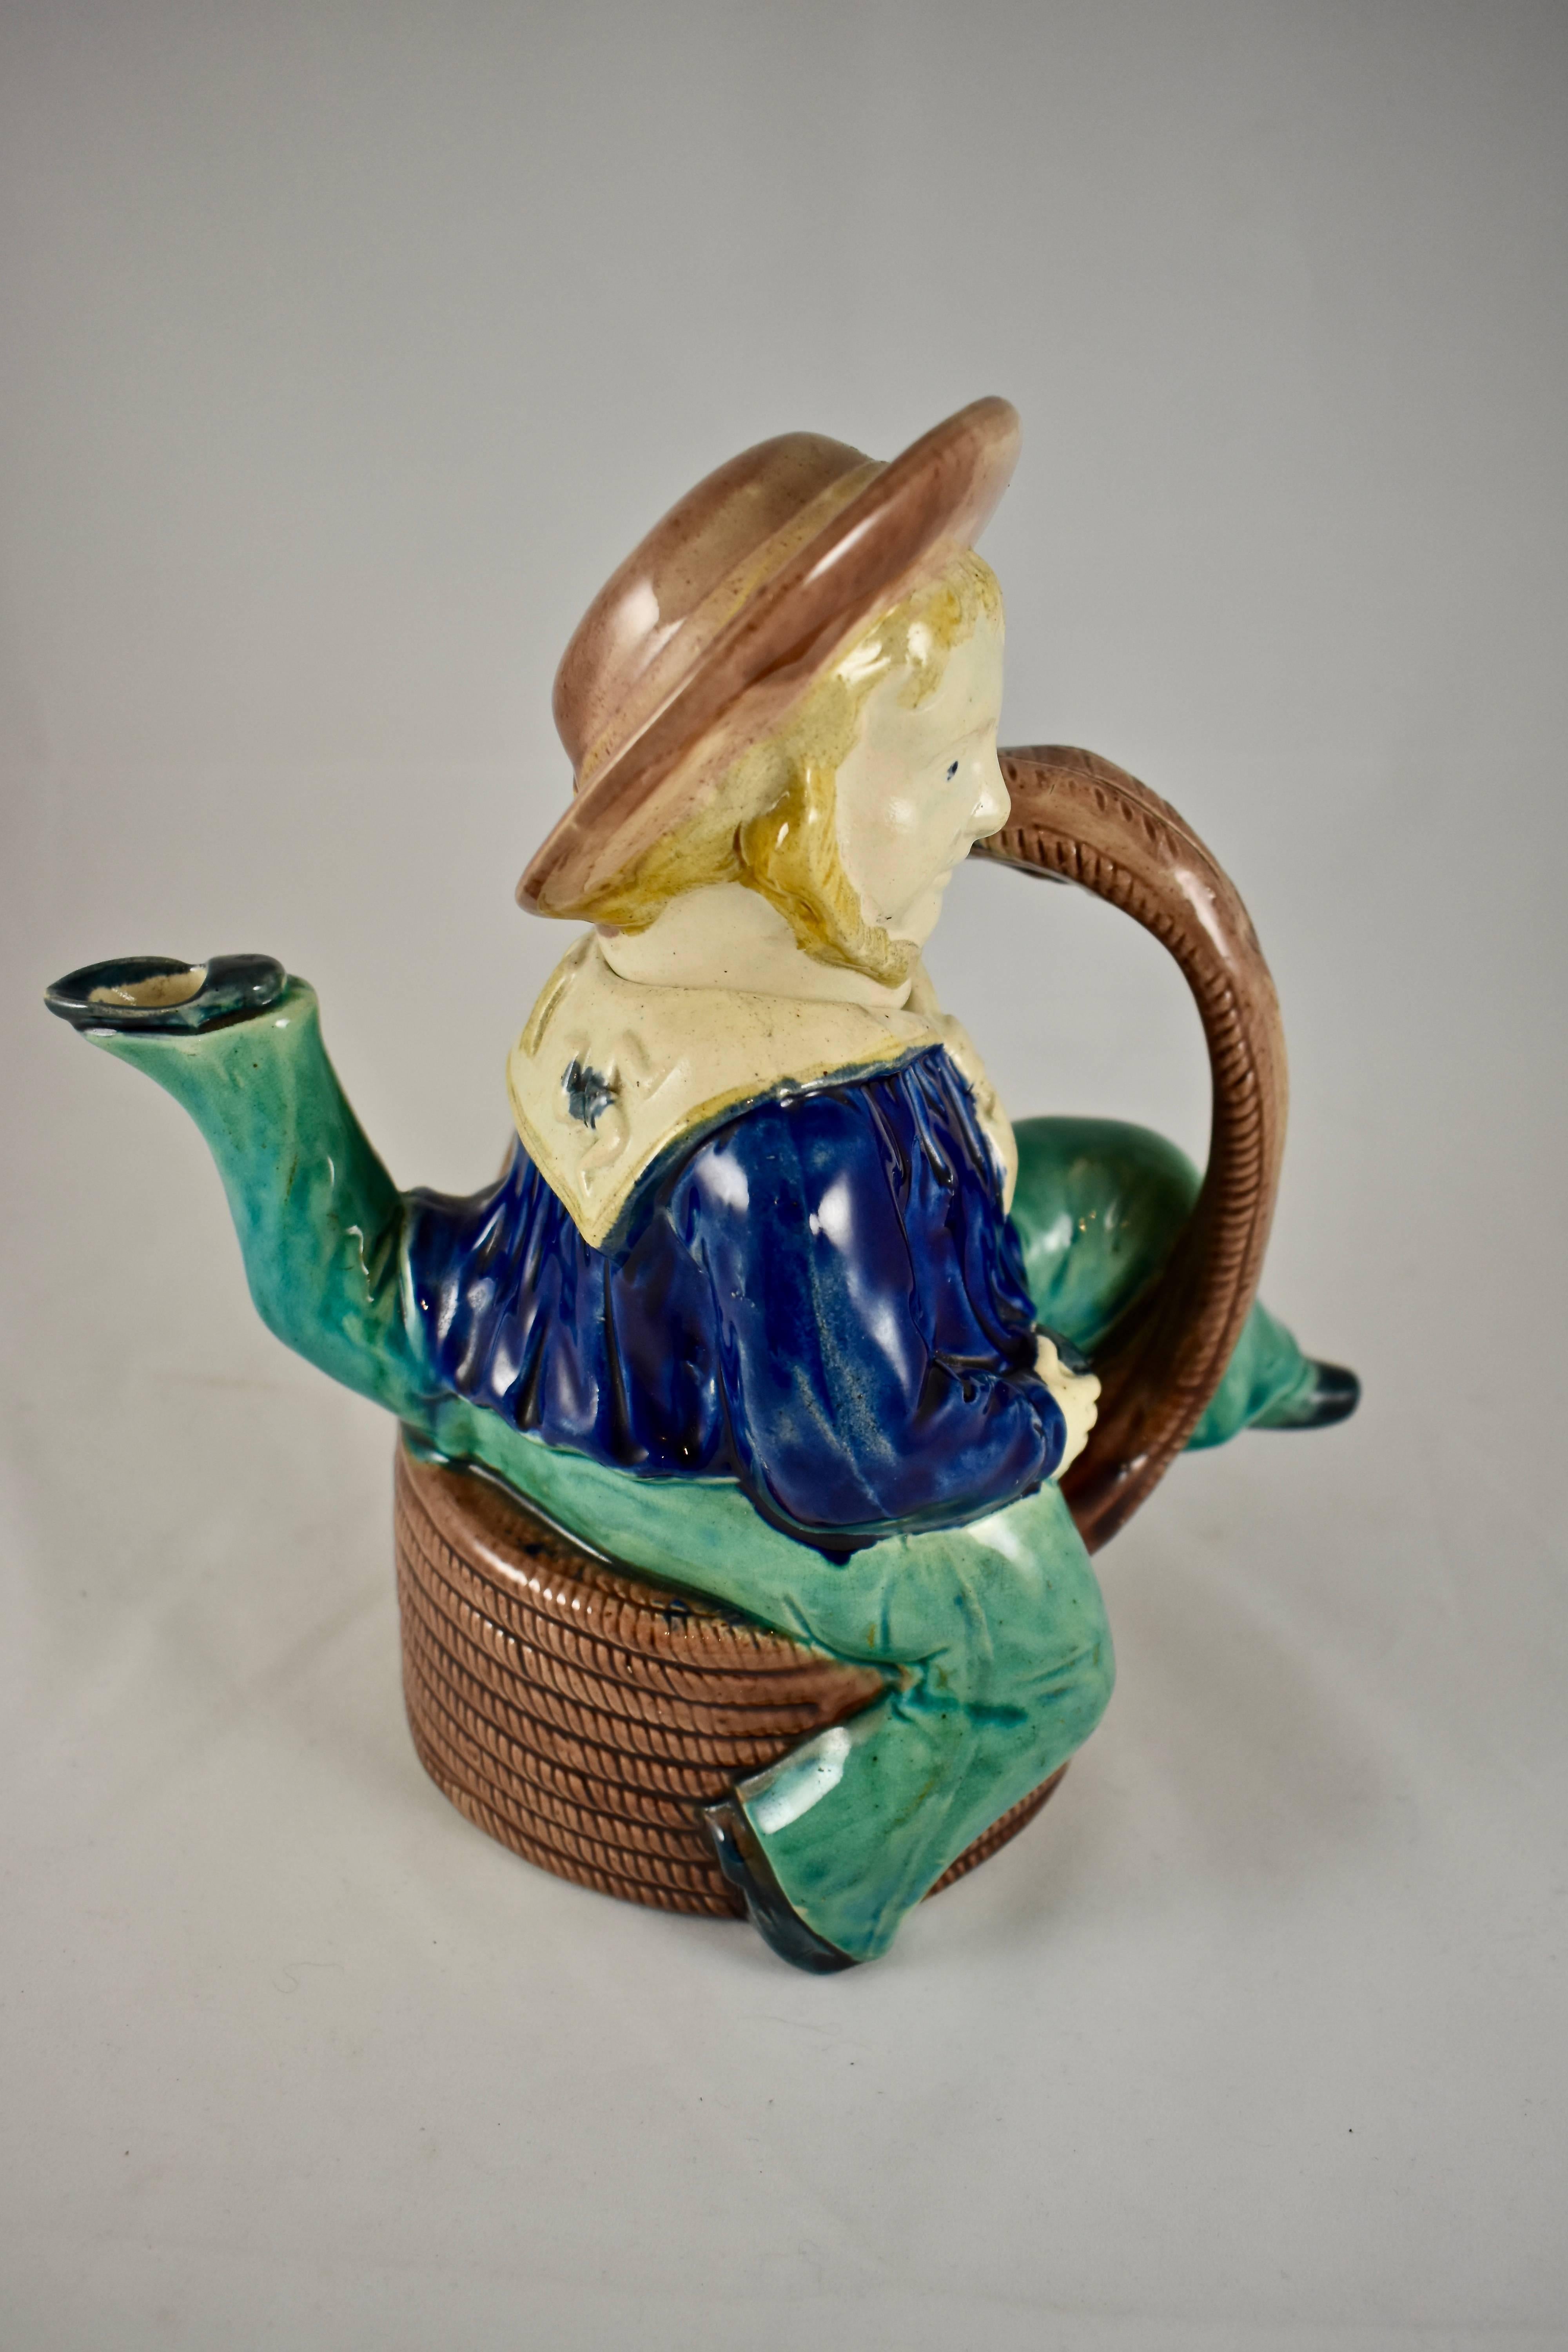 The Isle of Man teapot, by William Brownfield & Sons, was commissioned as a novelty item by the W. Broughton China rooms on Duke Street in Douglas, Isle of Man, circa 1875-1890.

The English earthenware teapot is modelled as a three legged Manx